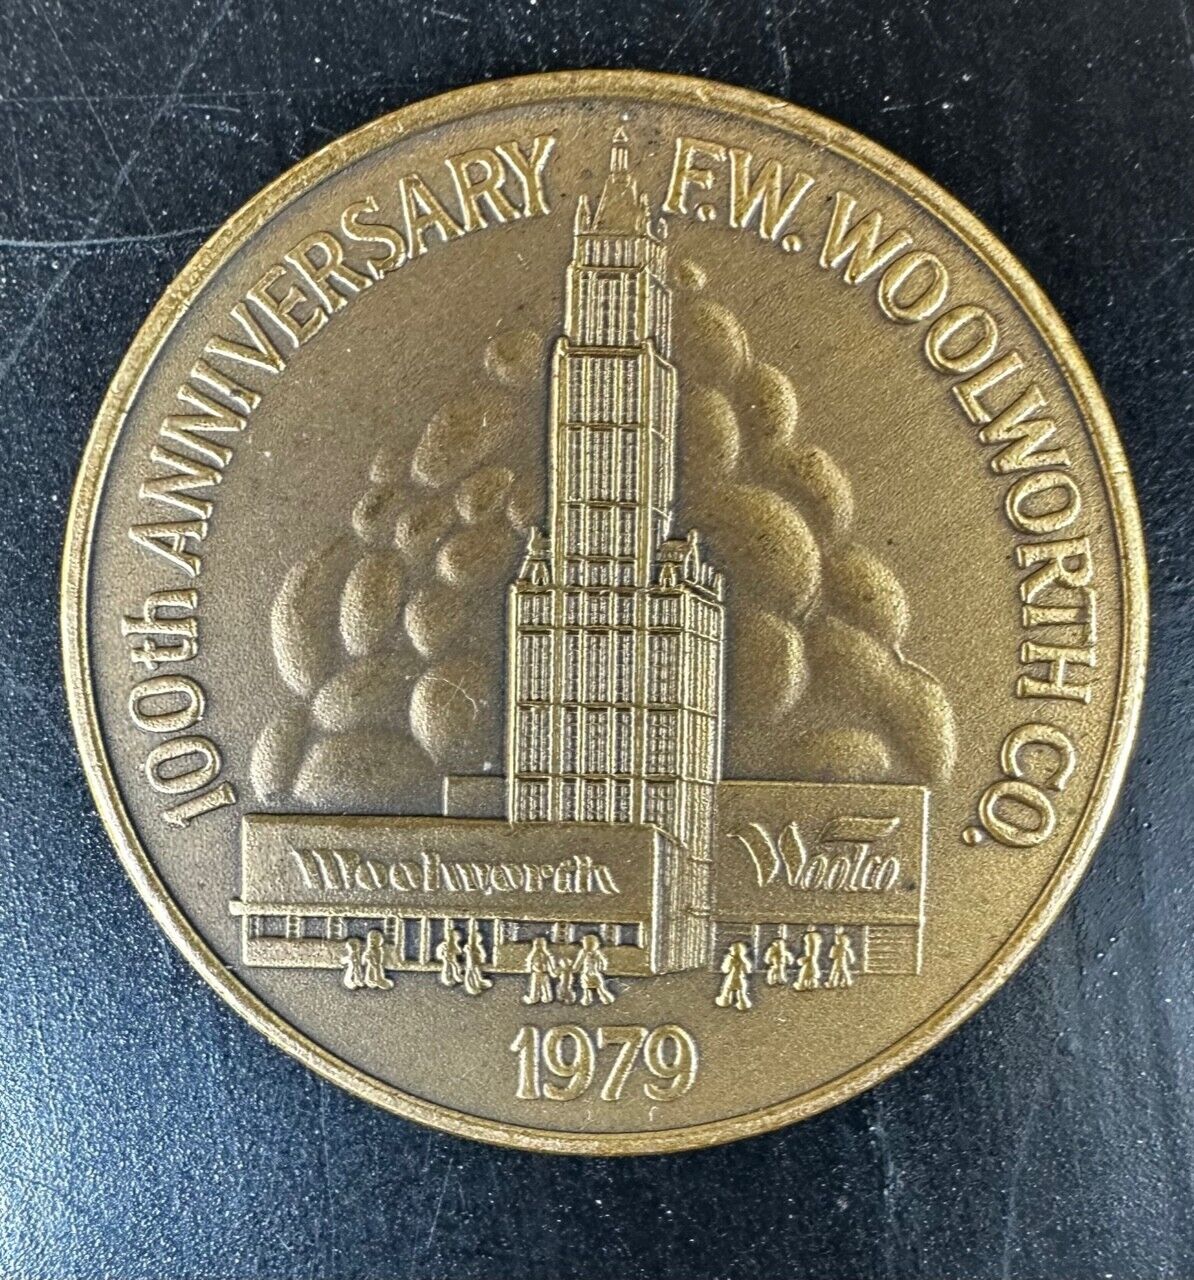 Rare 1979 F W Woolworth Co 100th Anniversary Medal Coin